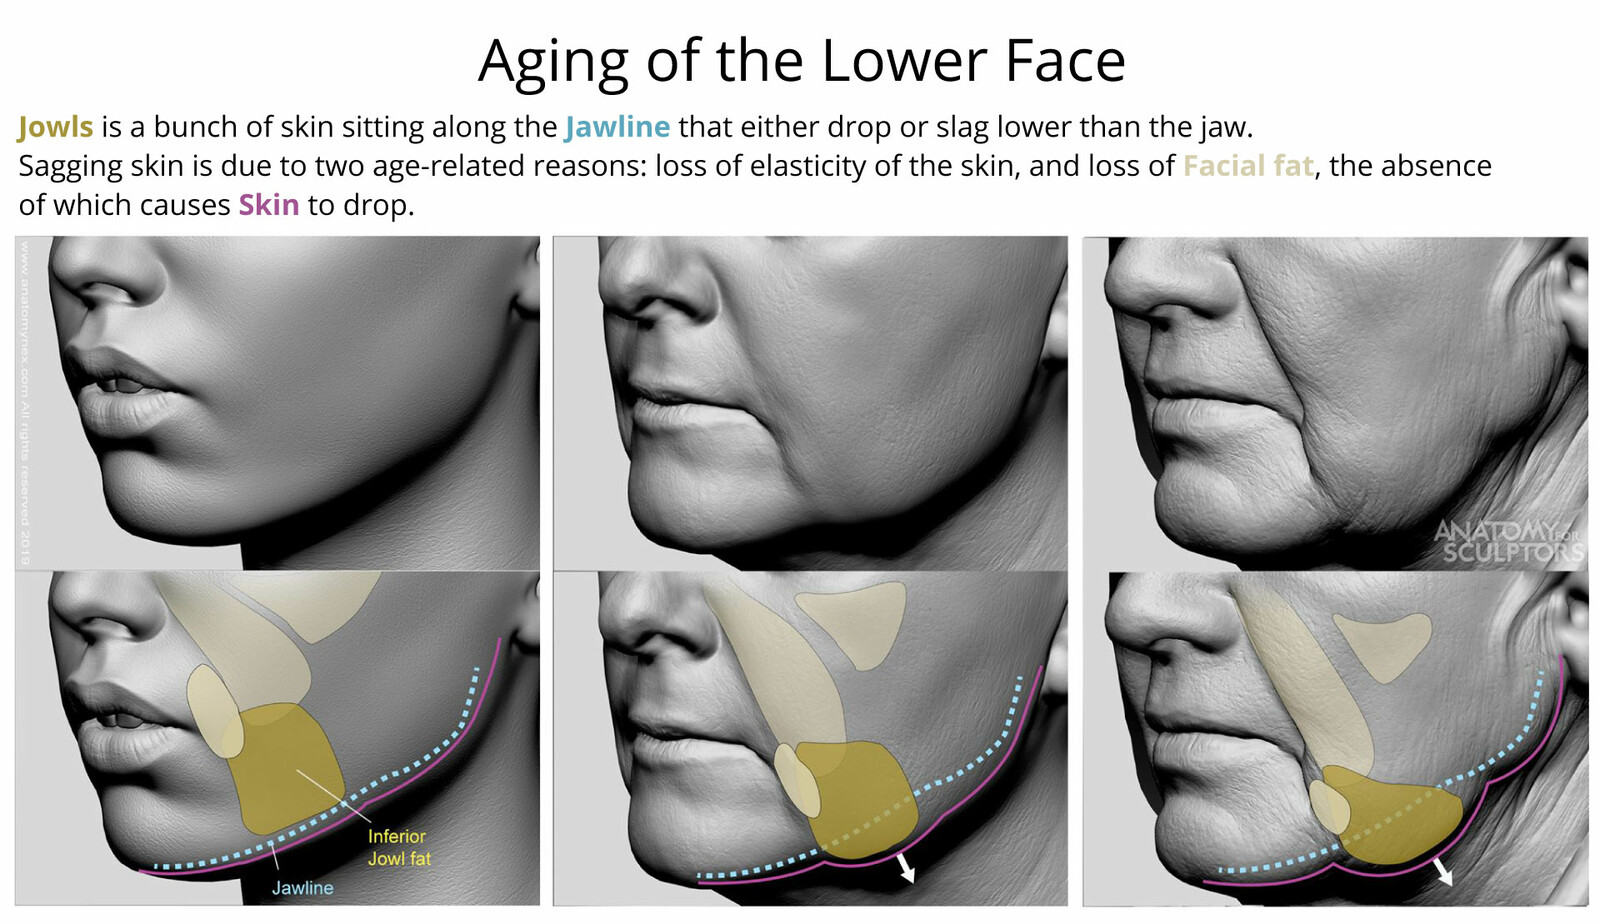 Anatomy For Sculptors - Aging of the Lower Face